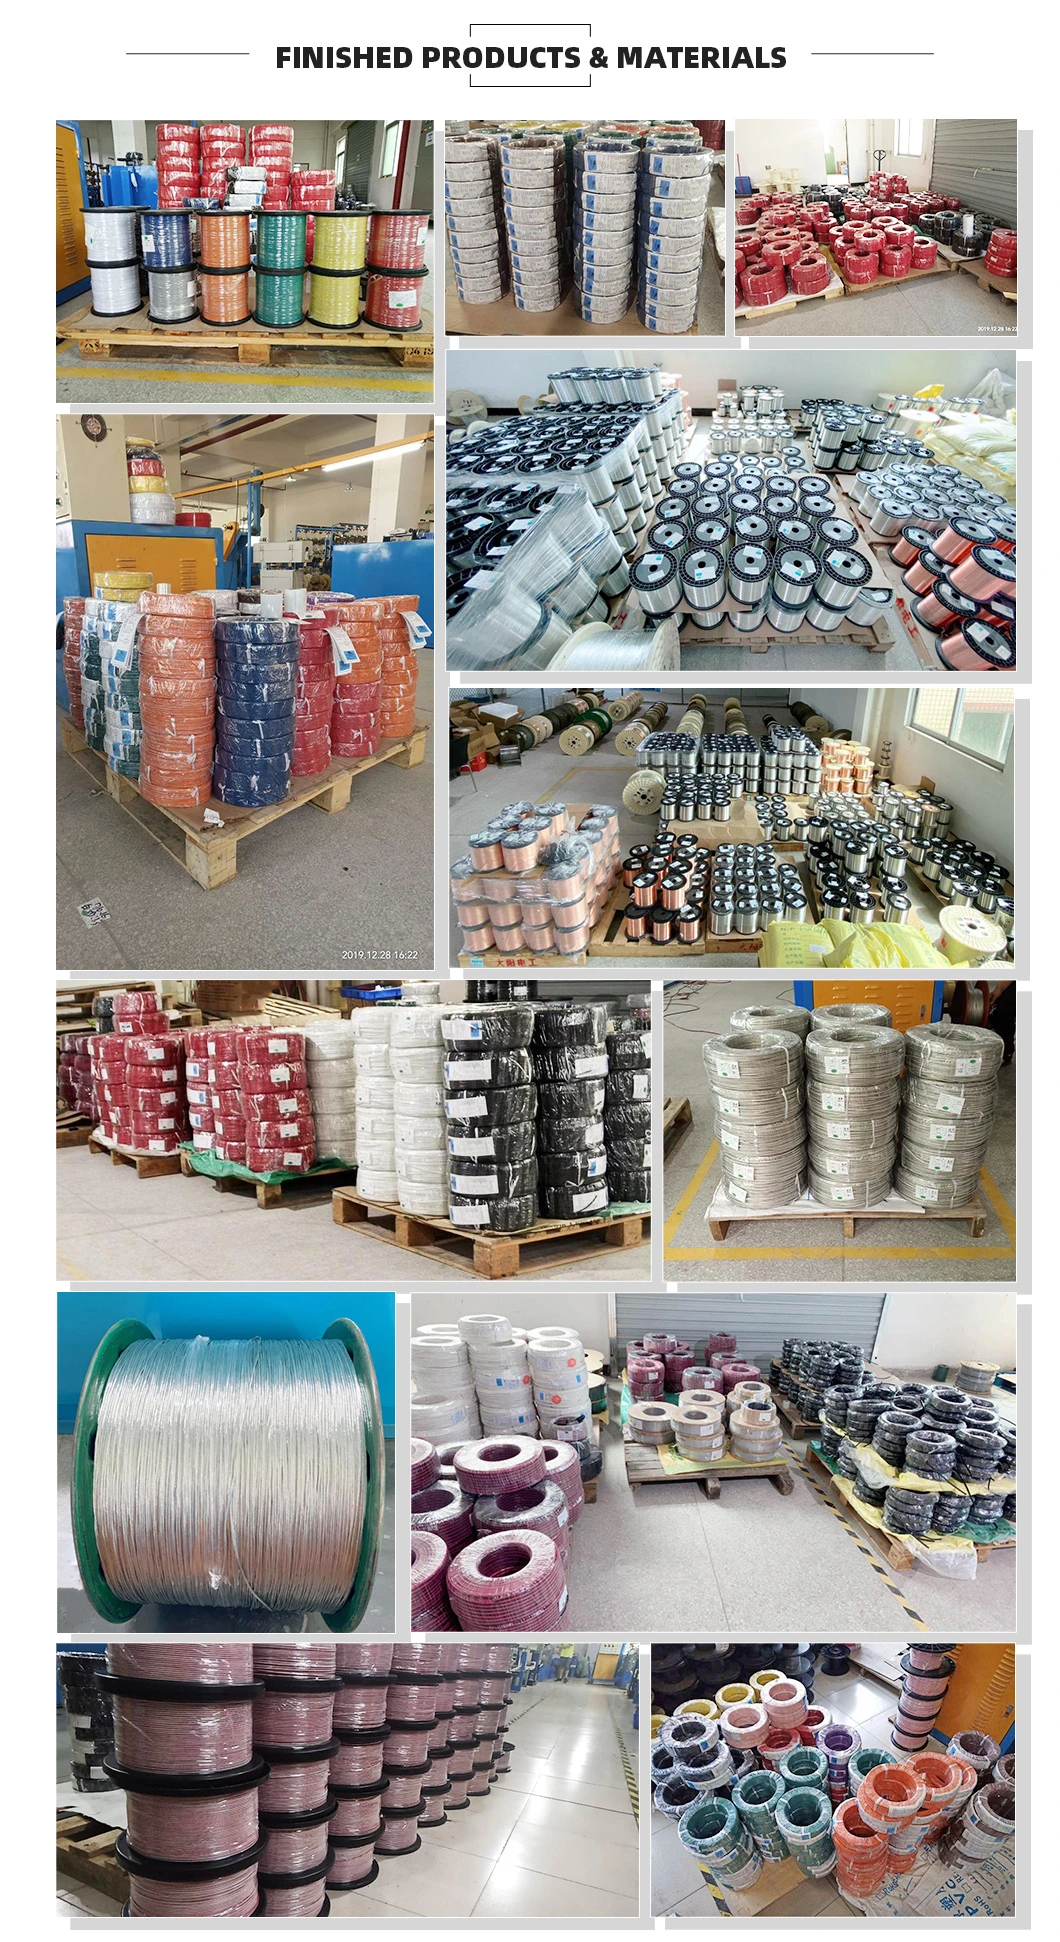 UL10070 Copper Conductor Wire Electrical PVC Insulated Wire for Internal Wiring of Electronic with Copper Wire